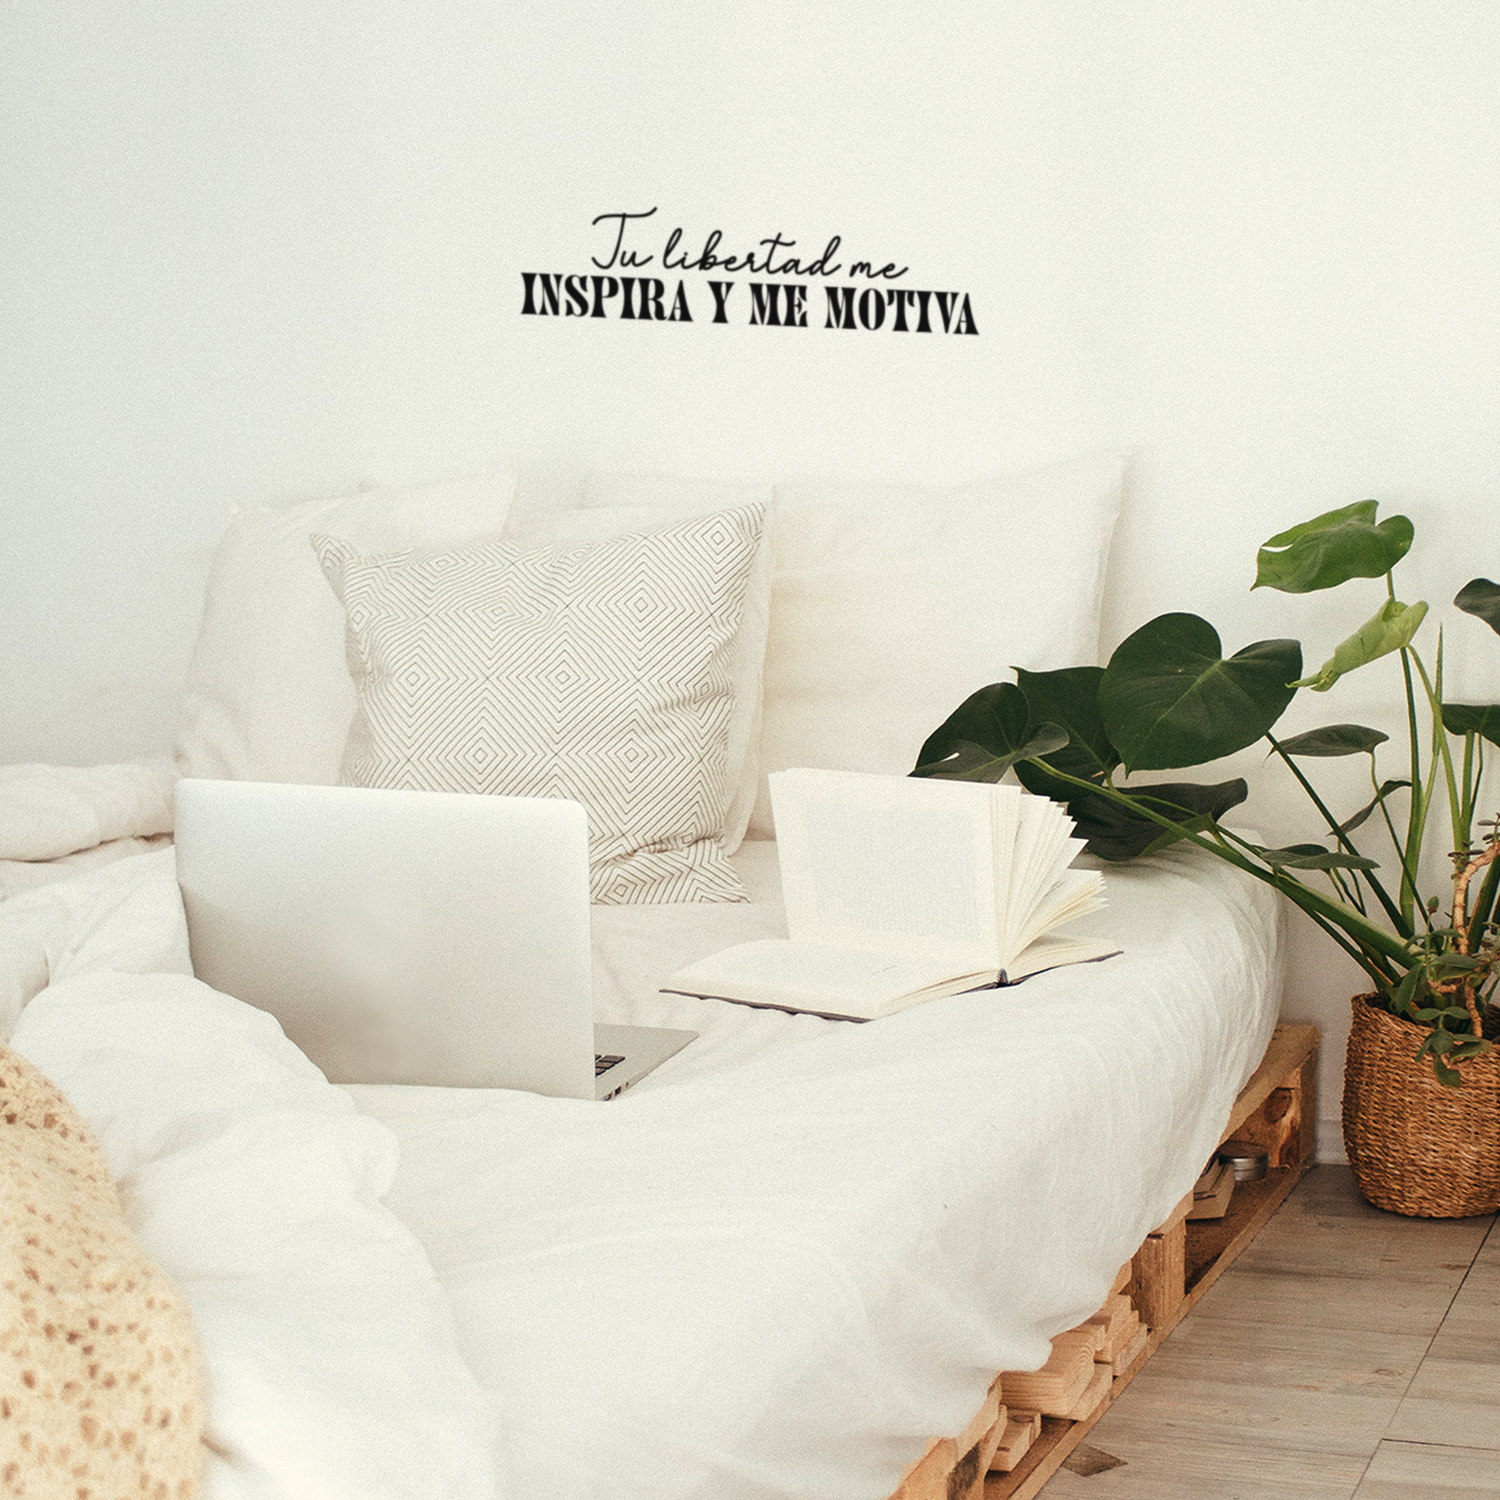 Inspirational Freedom Is Never Free Vinyl Wall Art Decal 16* x 30* 